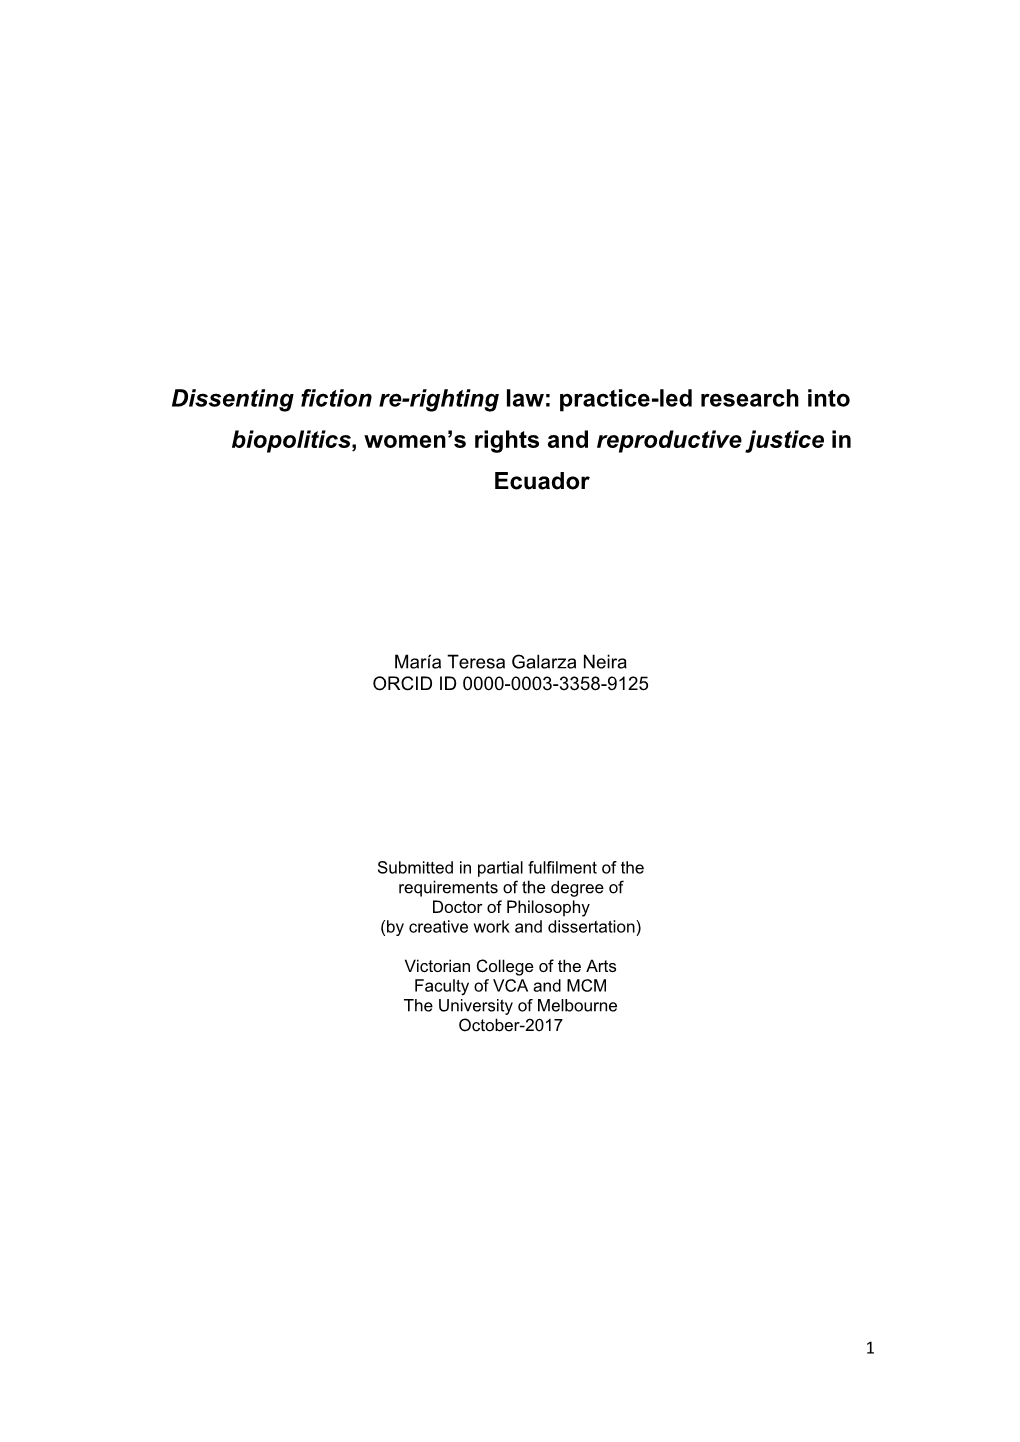 Dissenting Fiction Re-Righting Law: Practice-Led Research Into Biopolitics, Women’S Rights and Reproductive Justice in Ecuador